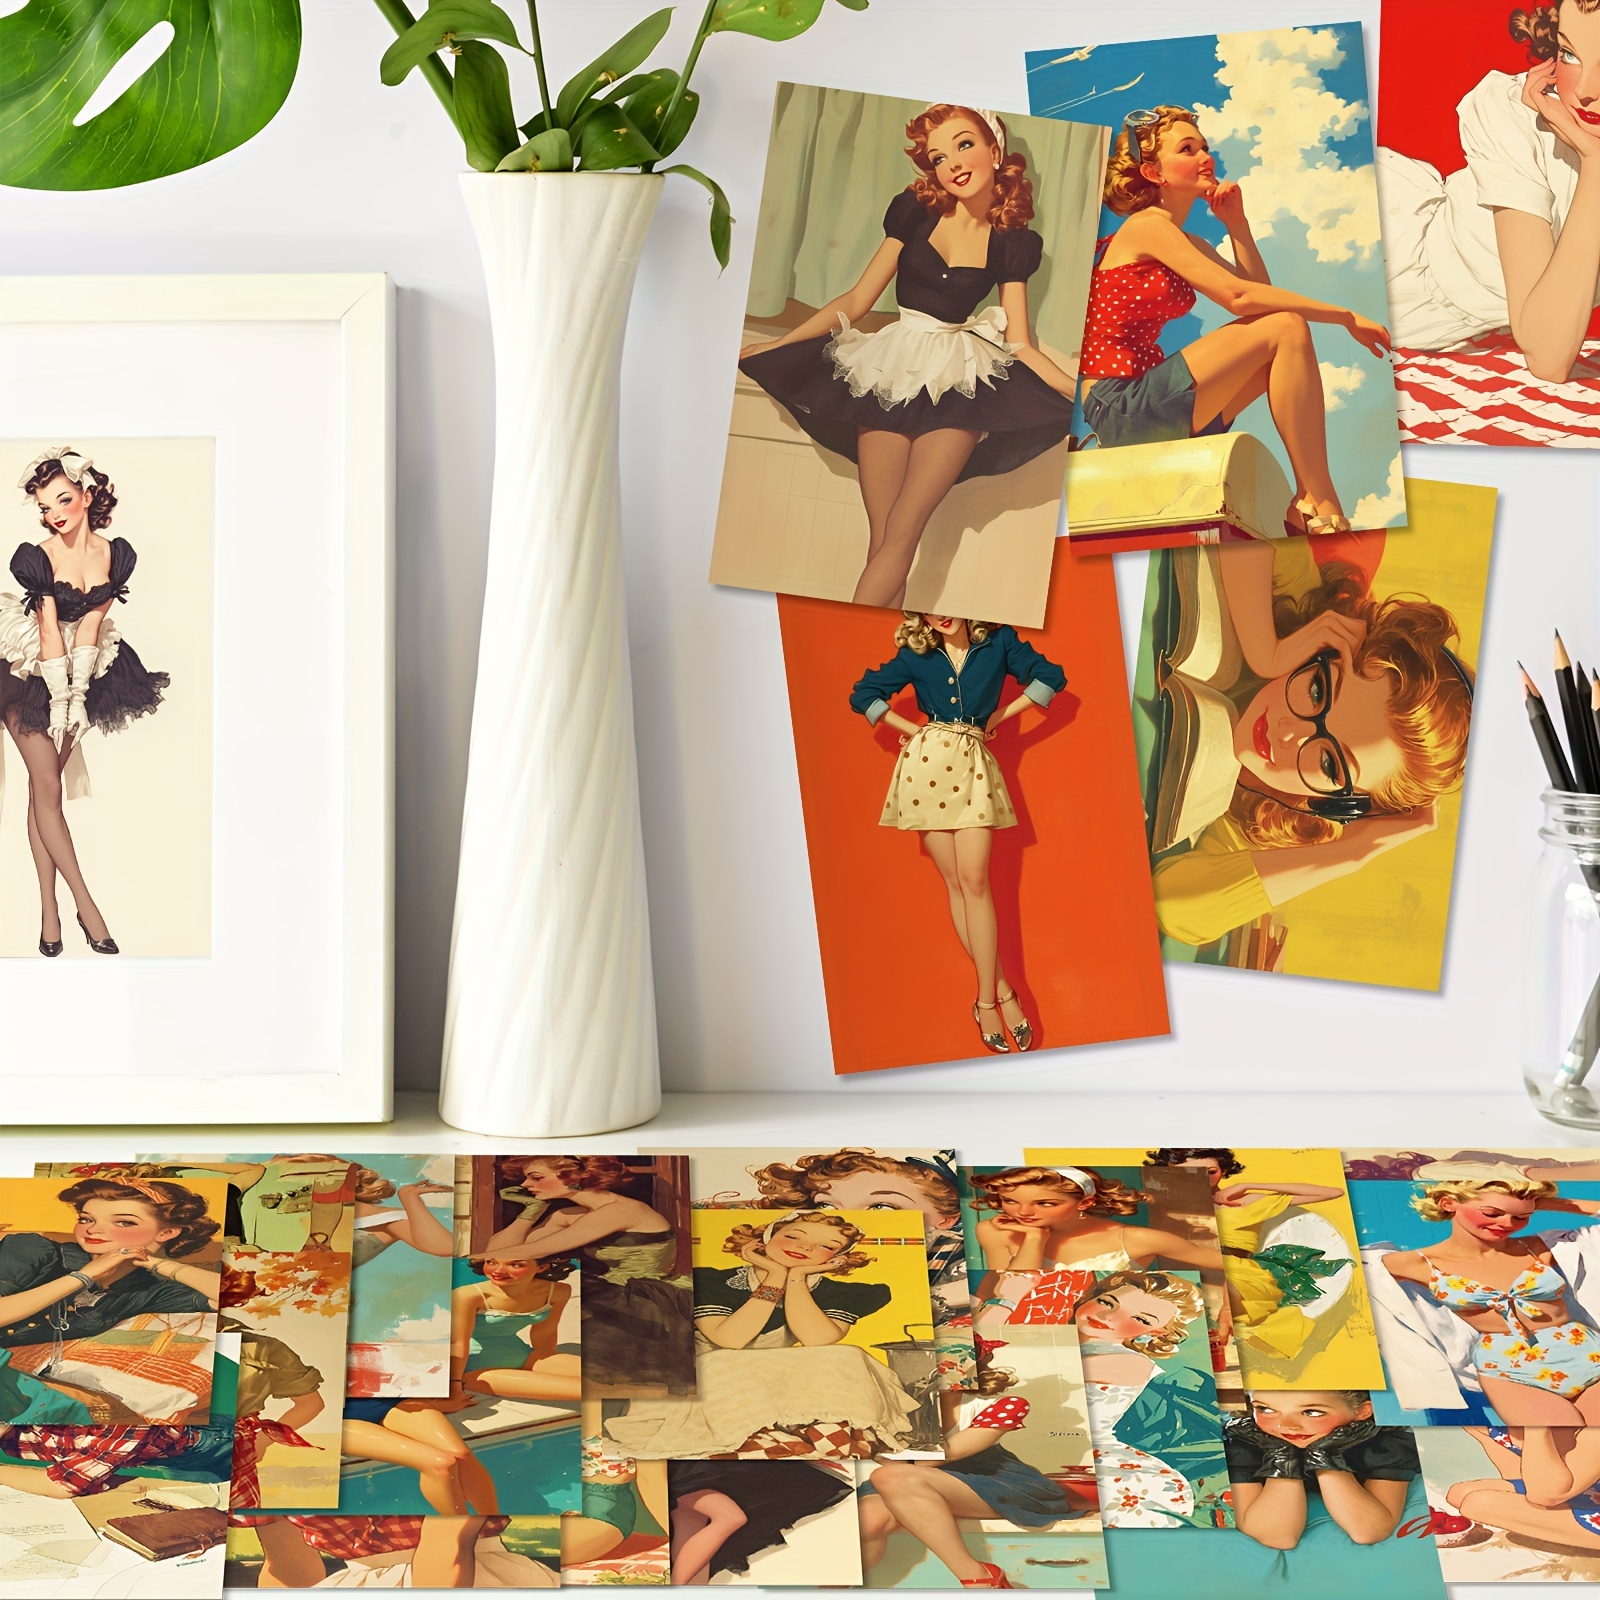 

chic Retro" 50 Vintage European Beauty Cards - Nostalgic Wall Art For Bedroom & Living Room Decor, Greeting Card Posters